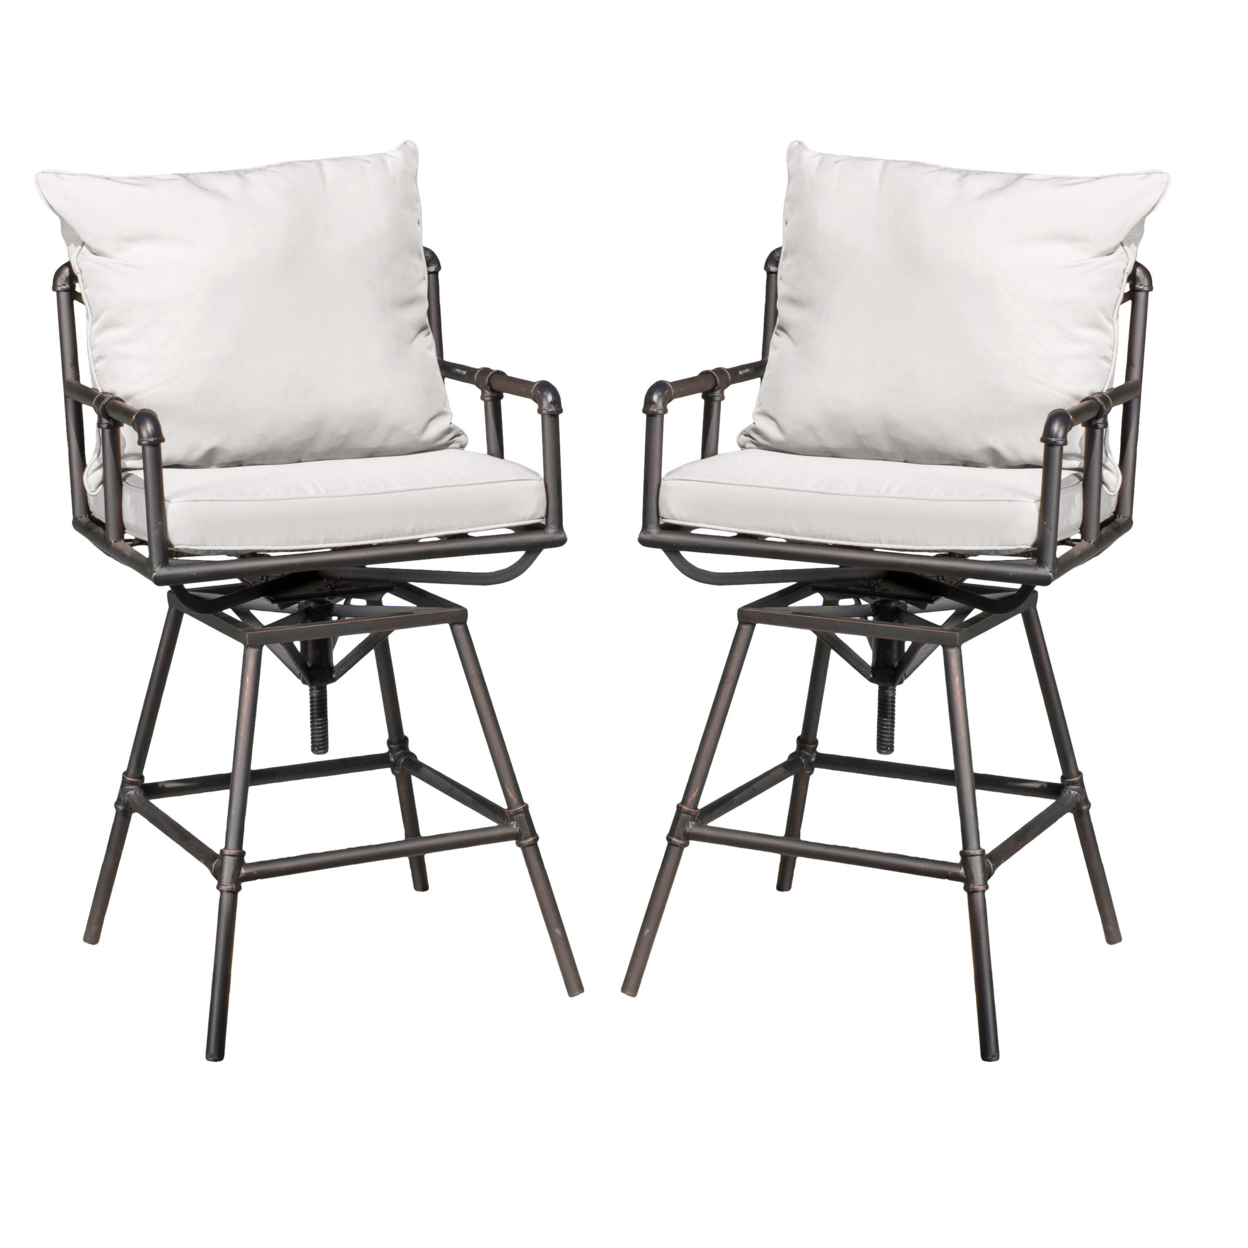 Varick Outdoor Adjustable Iron Barstool With Cushions (Set Of 2)